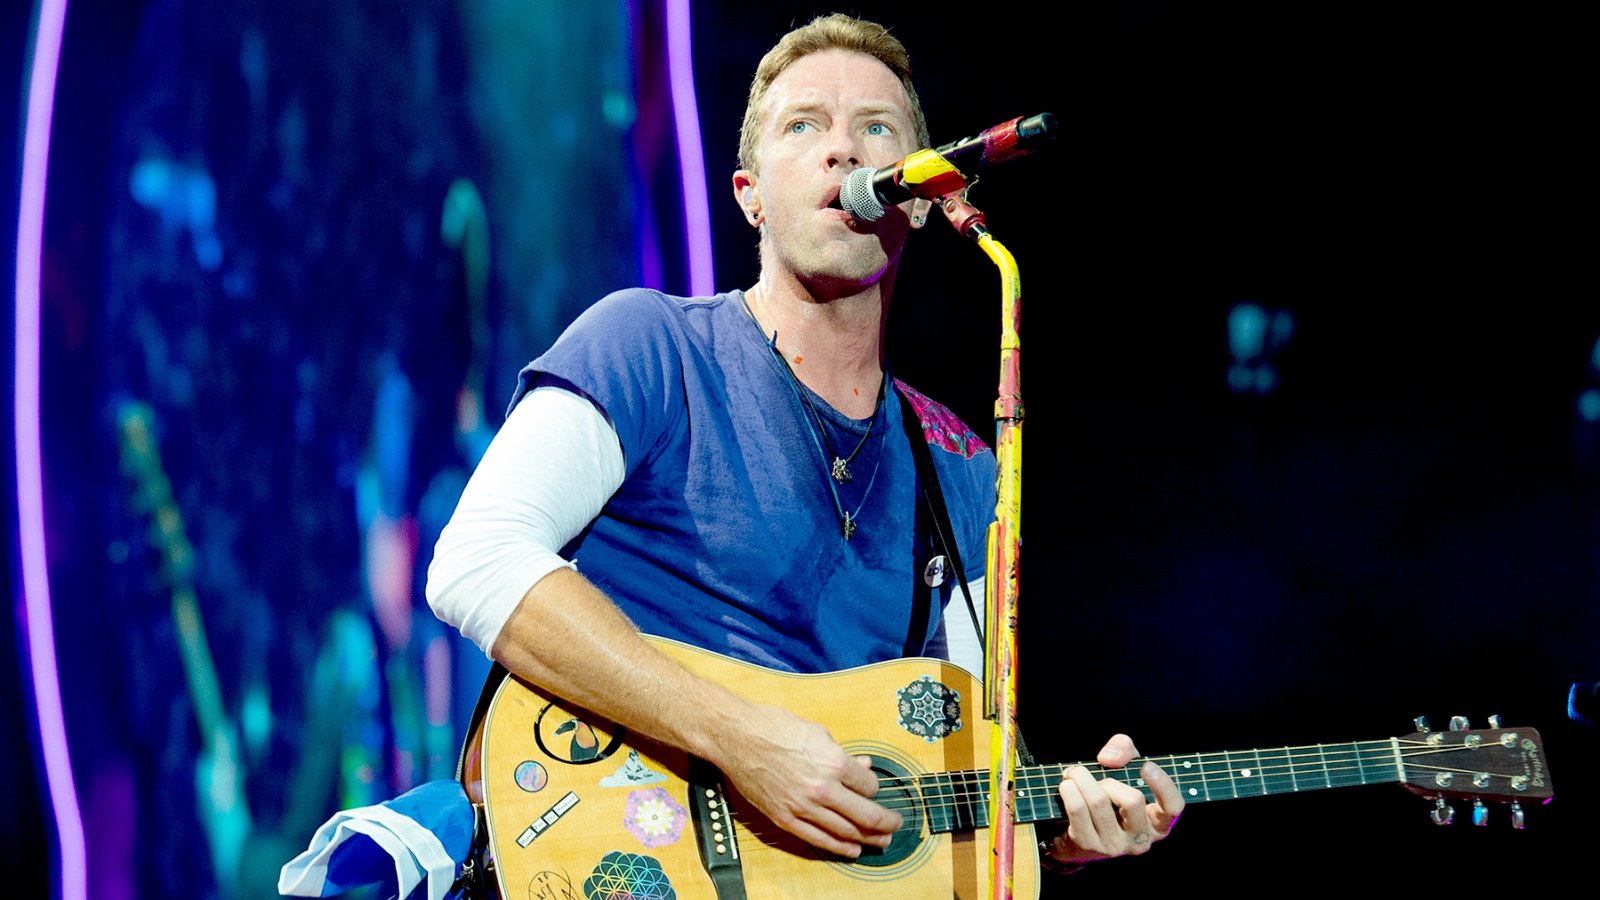 Chris Martin from Coldplay performs at Stade de France on July 15, 2017 in Paris, France.